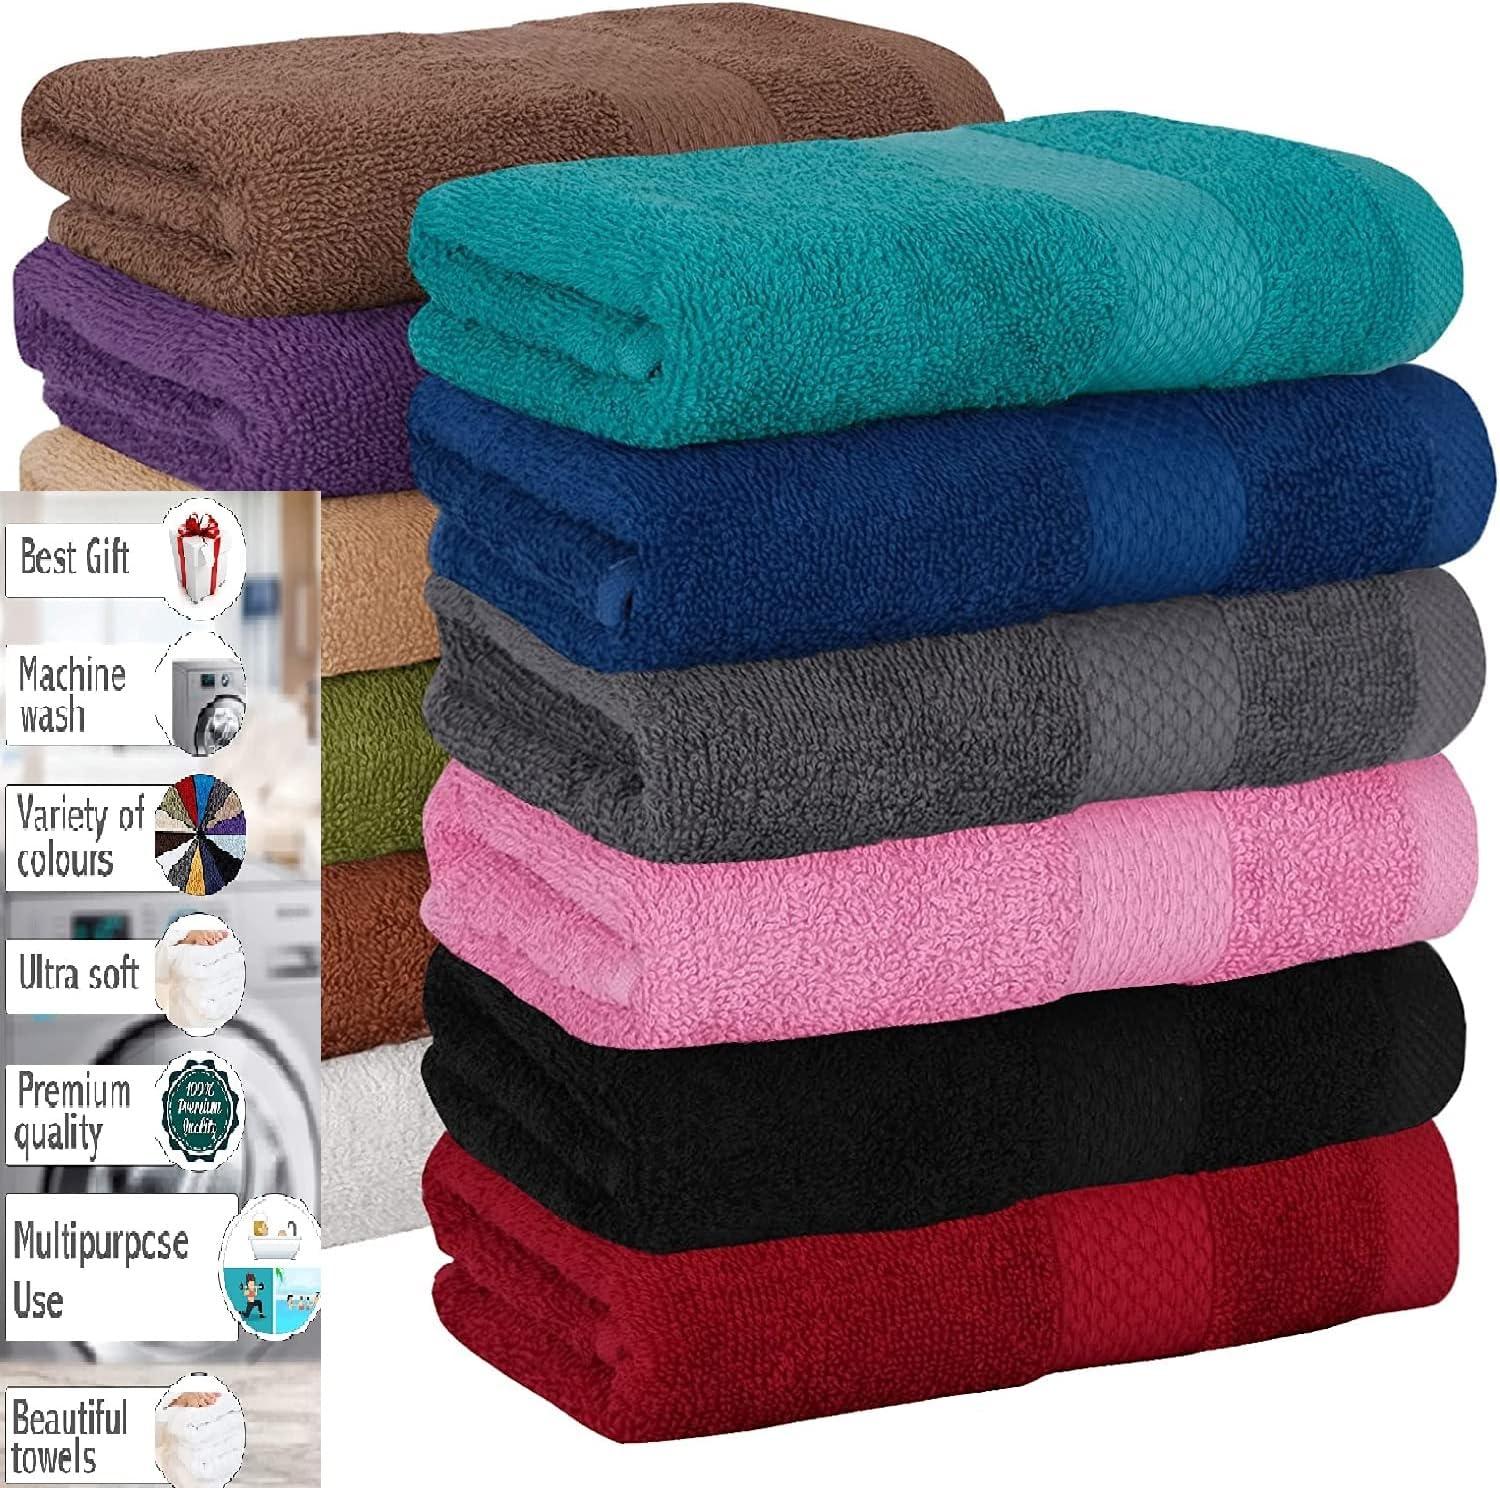  BAKN 12-Pack 100% Cotton White Quality Bar Towels